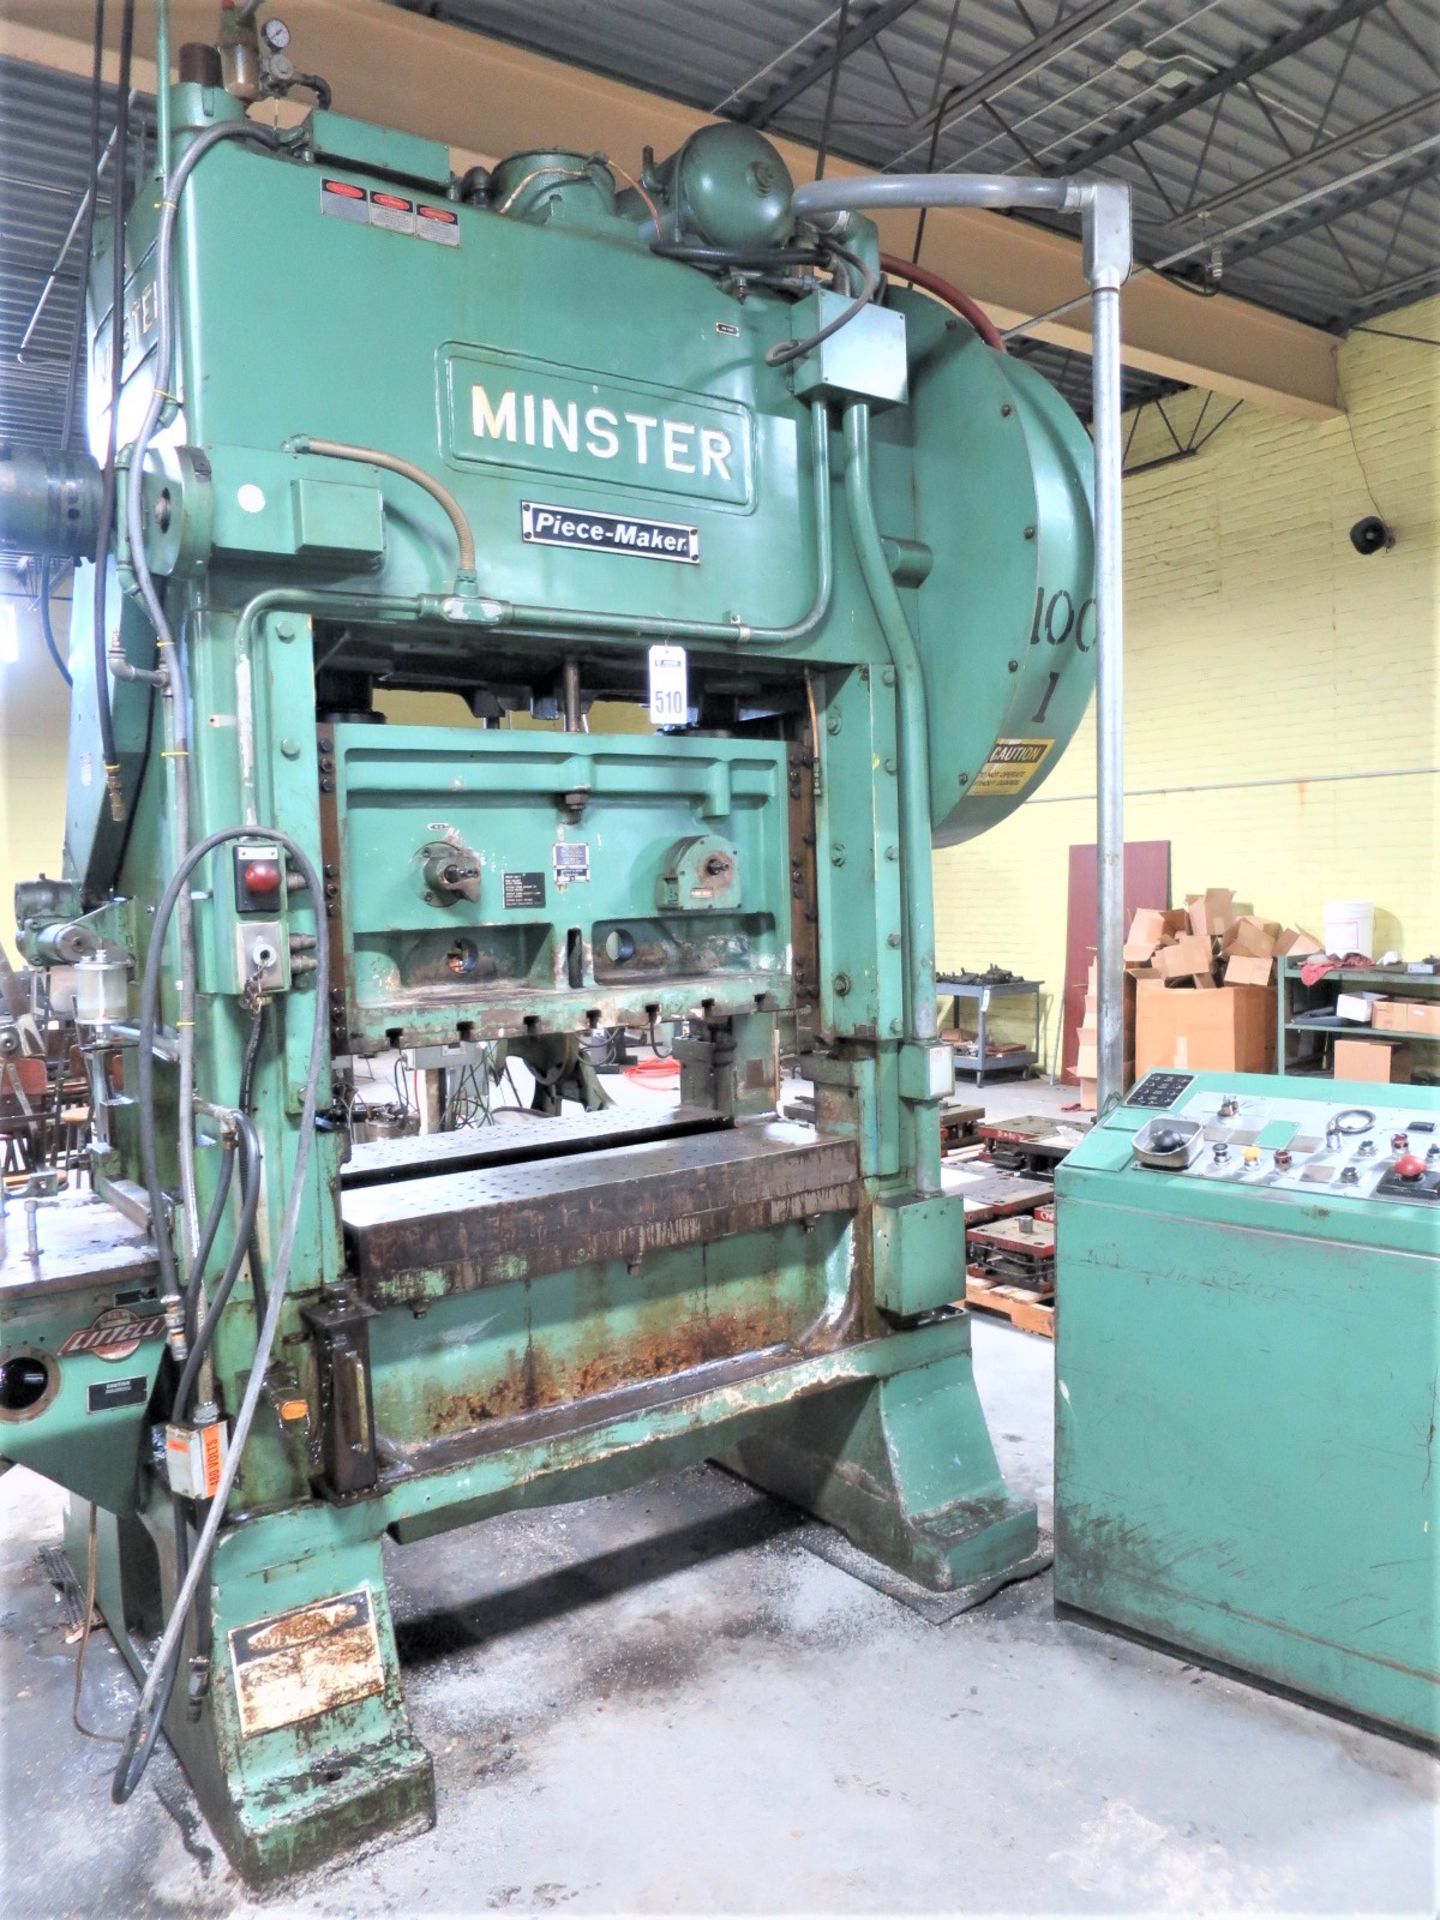 Minster 100 Ton Piece-Maker Variable Speed Stamping Press Model P2-100-48, Sn P2-100-23653 48" x 31"